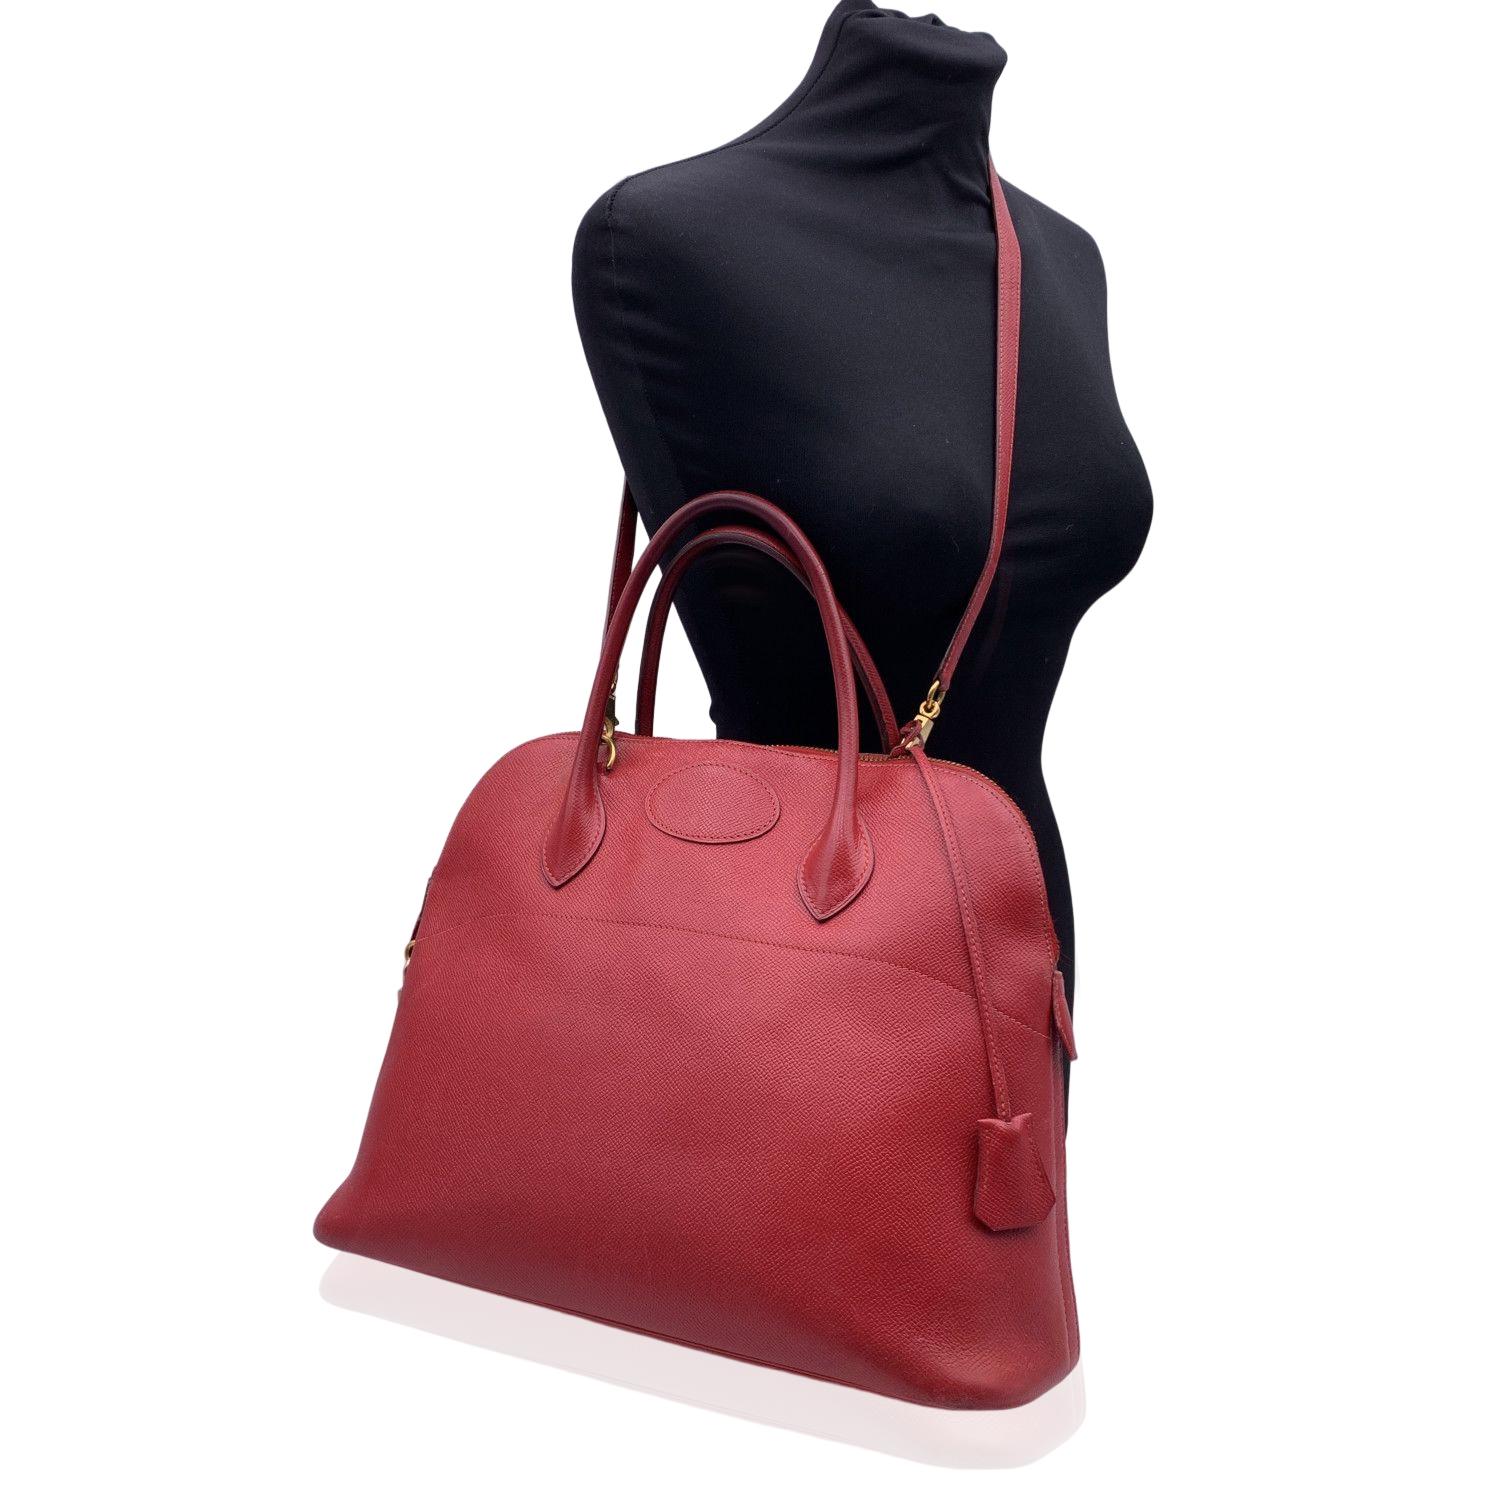 Sophisticated and timeless Hermes BOLIDE BAG crafted in red leather from the 1992 (blind stamp is 'V' encased in a circle). It features a doomed top with double top rolled leather handles and removable shoulder strap. Upper zipper closure. This